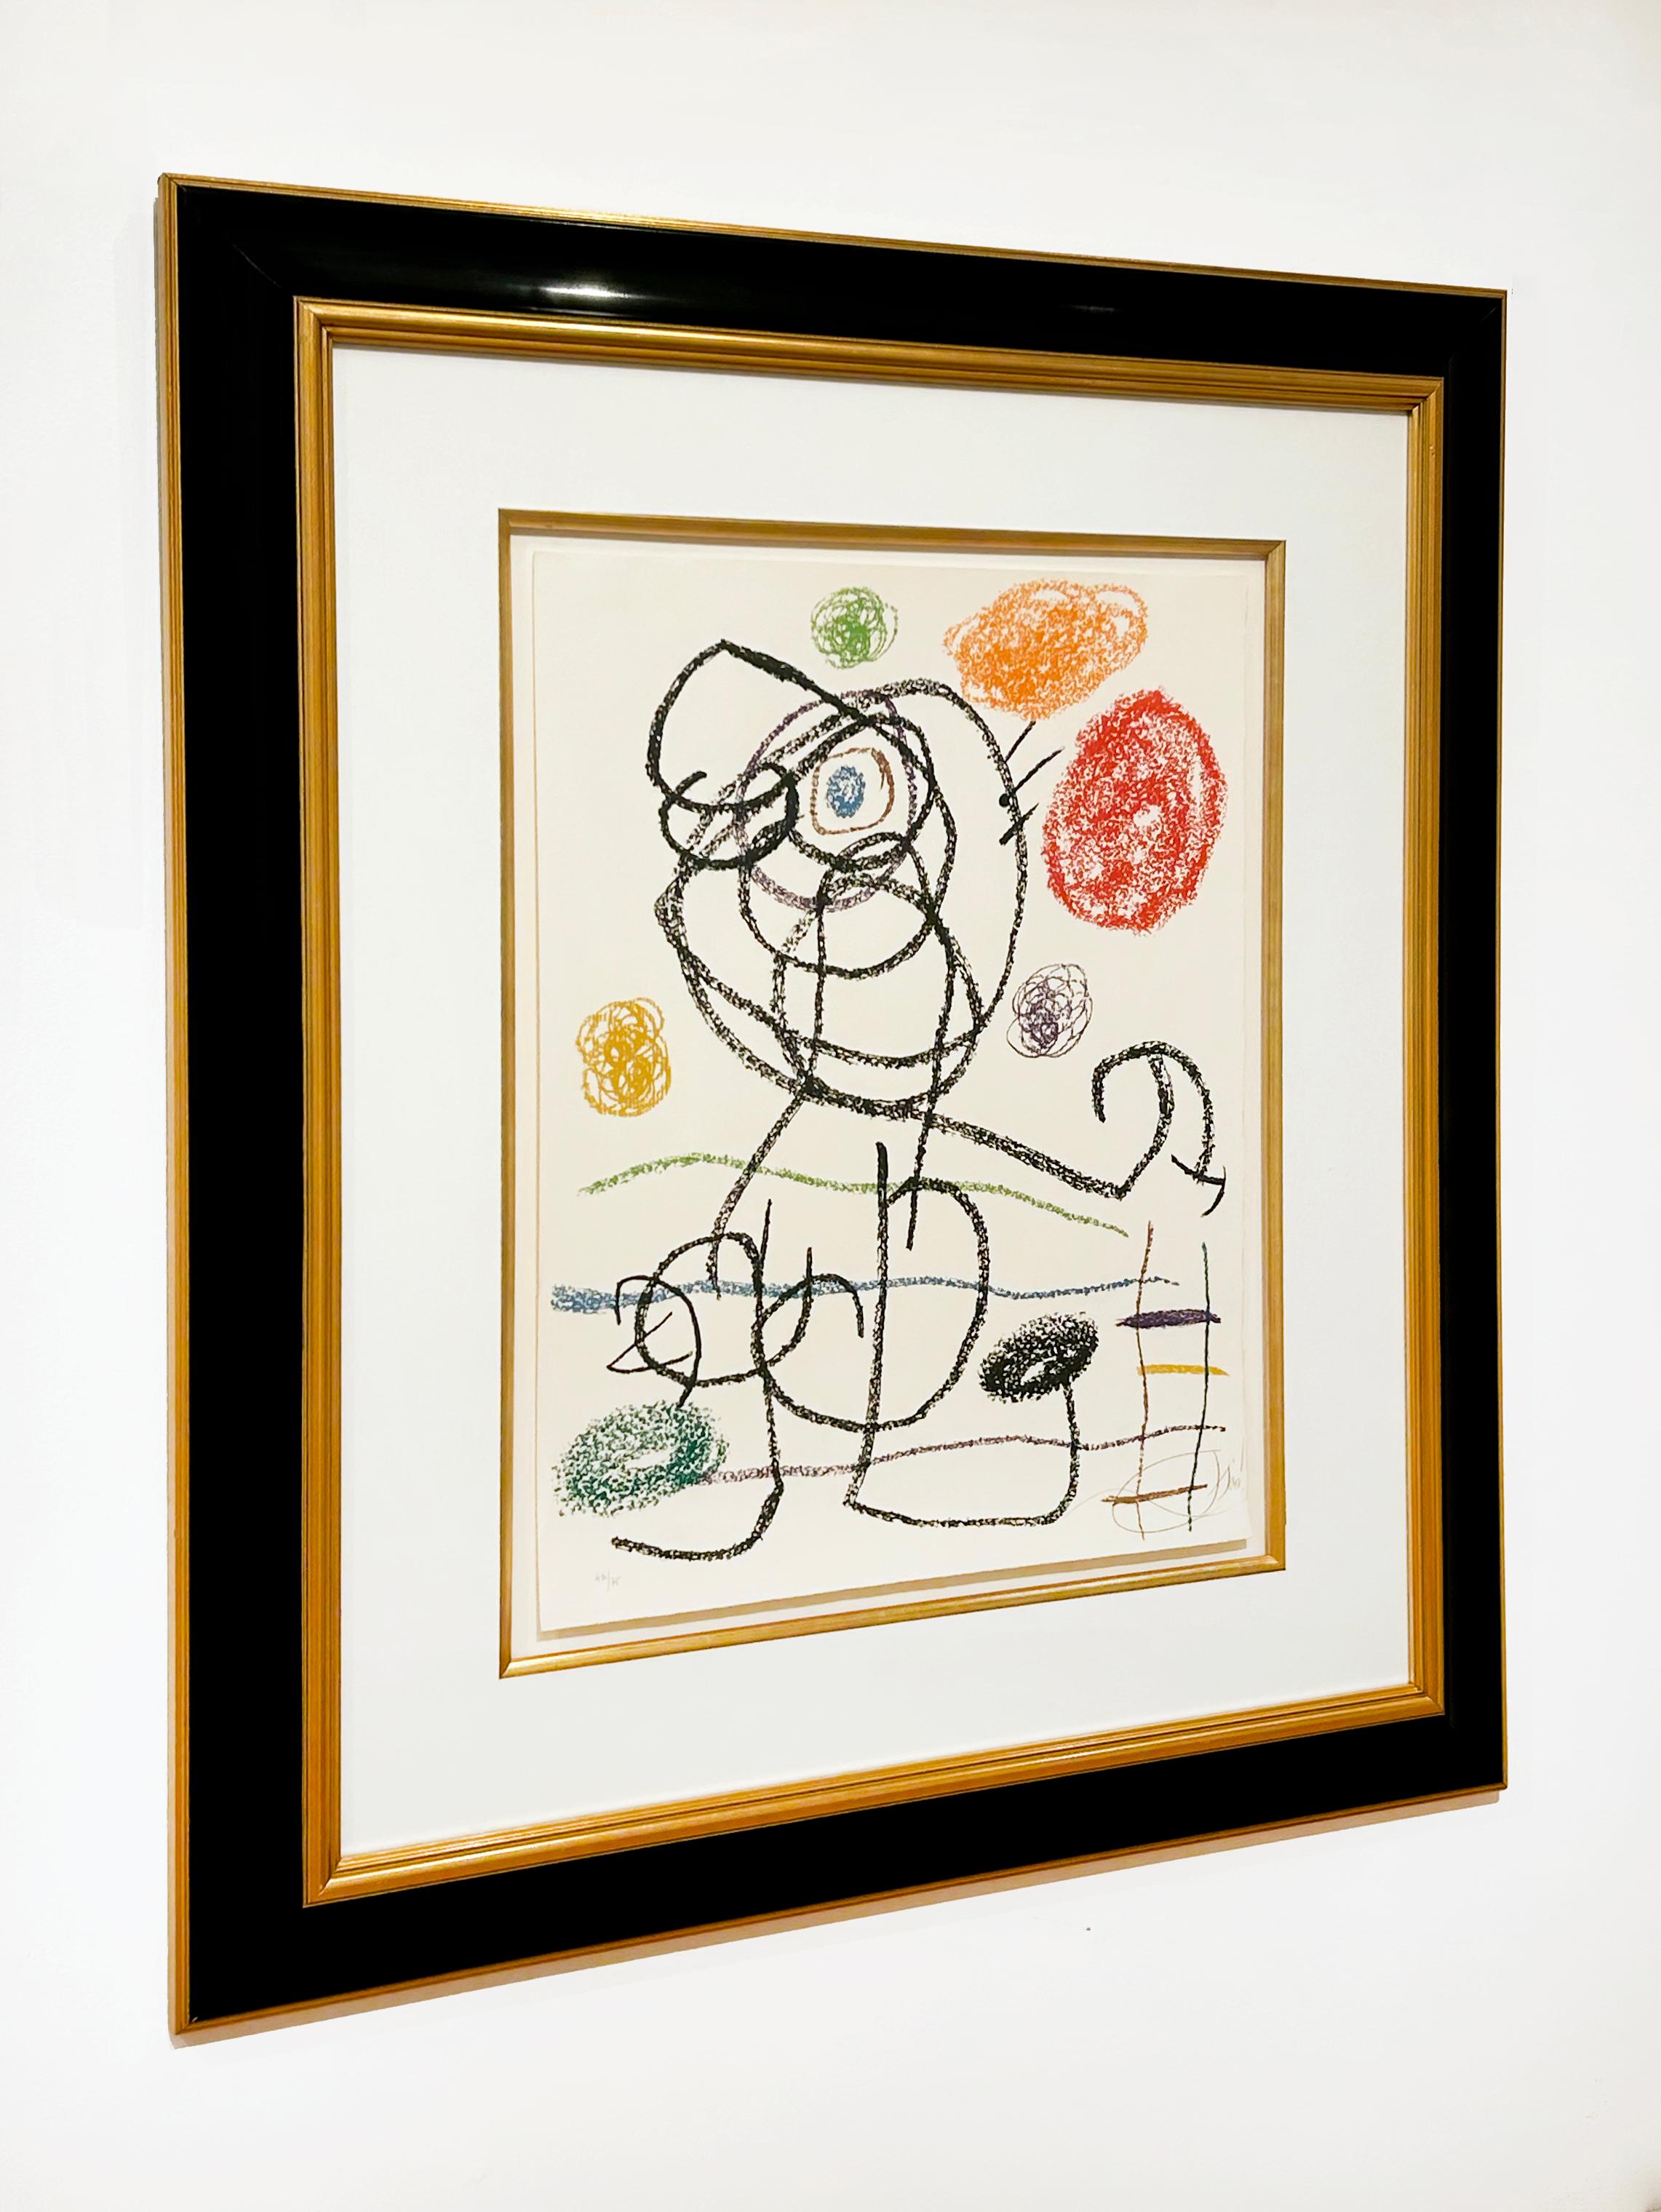 Artist:  Miro, Joan
Title:  One Plate from Album 21 (Maeght 1135)
Series:  Album 21
Date:  1978
Medium:  Lithograph in colors on Arches
Unframed Dimensions:  25.5